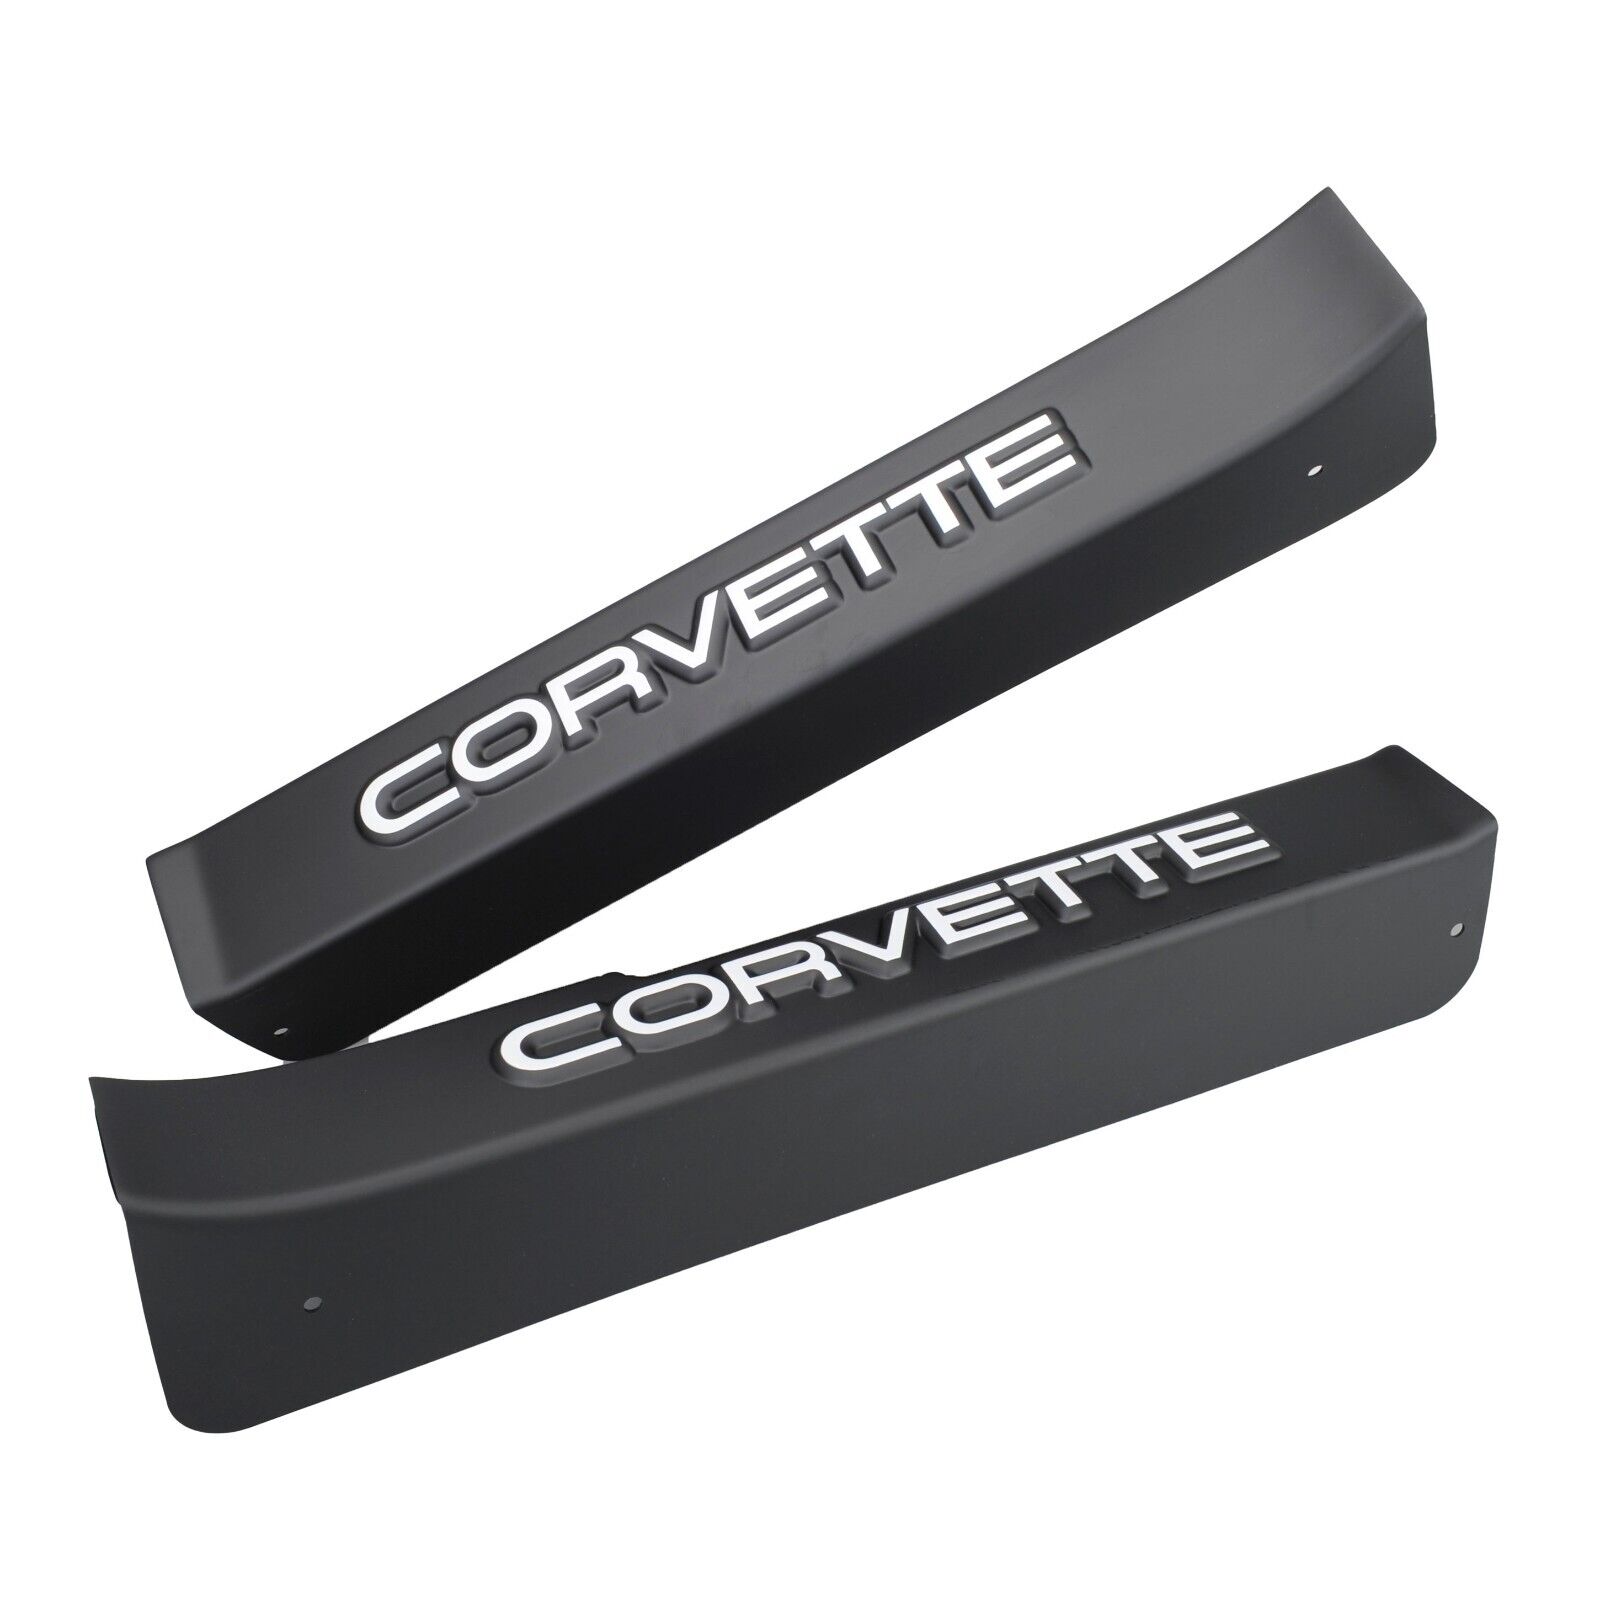 2pc OEM GM Corvette Black Door Sill Guards / Protectors with Logo for 1984-87 C4